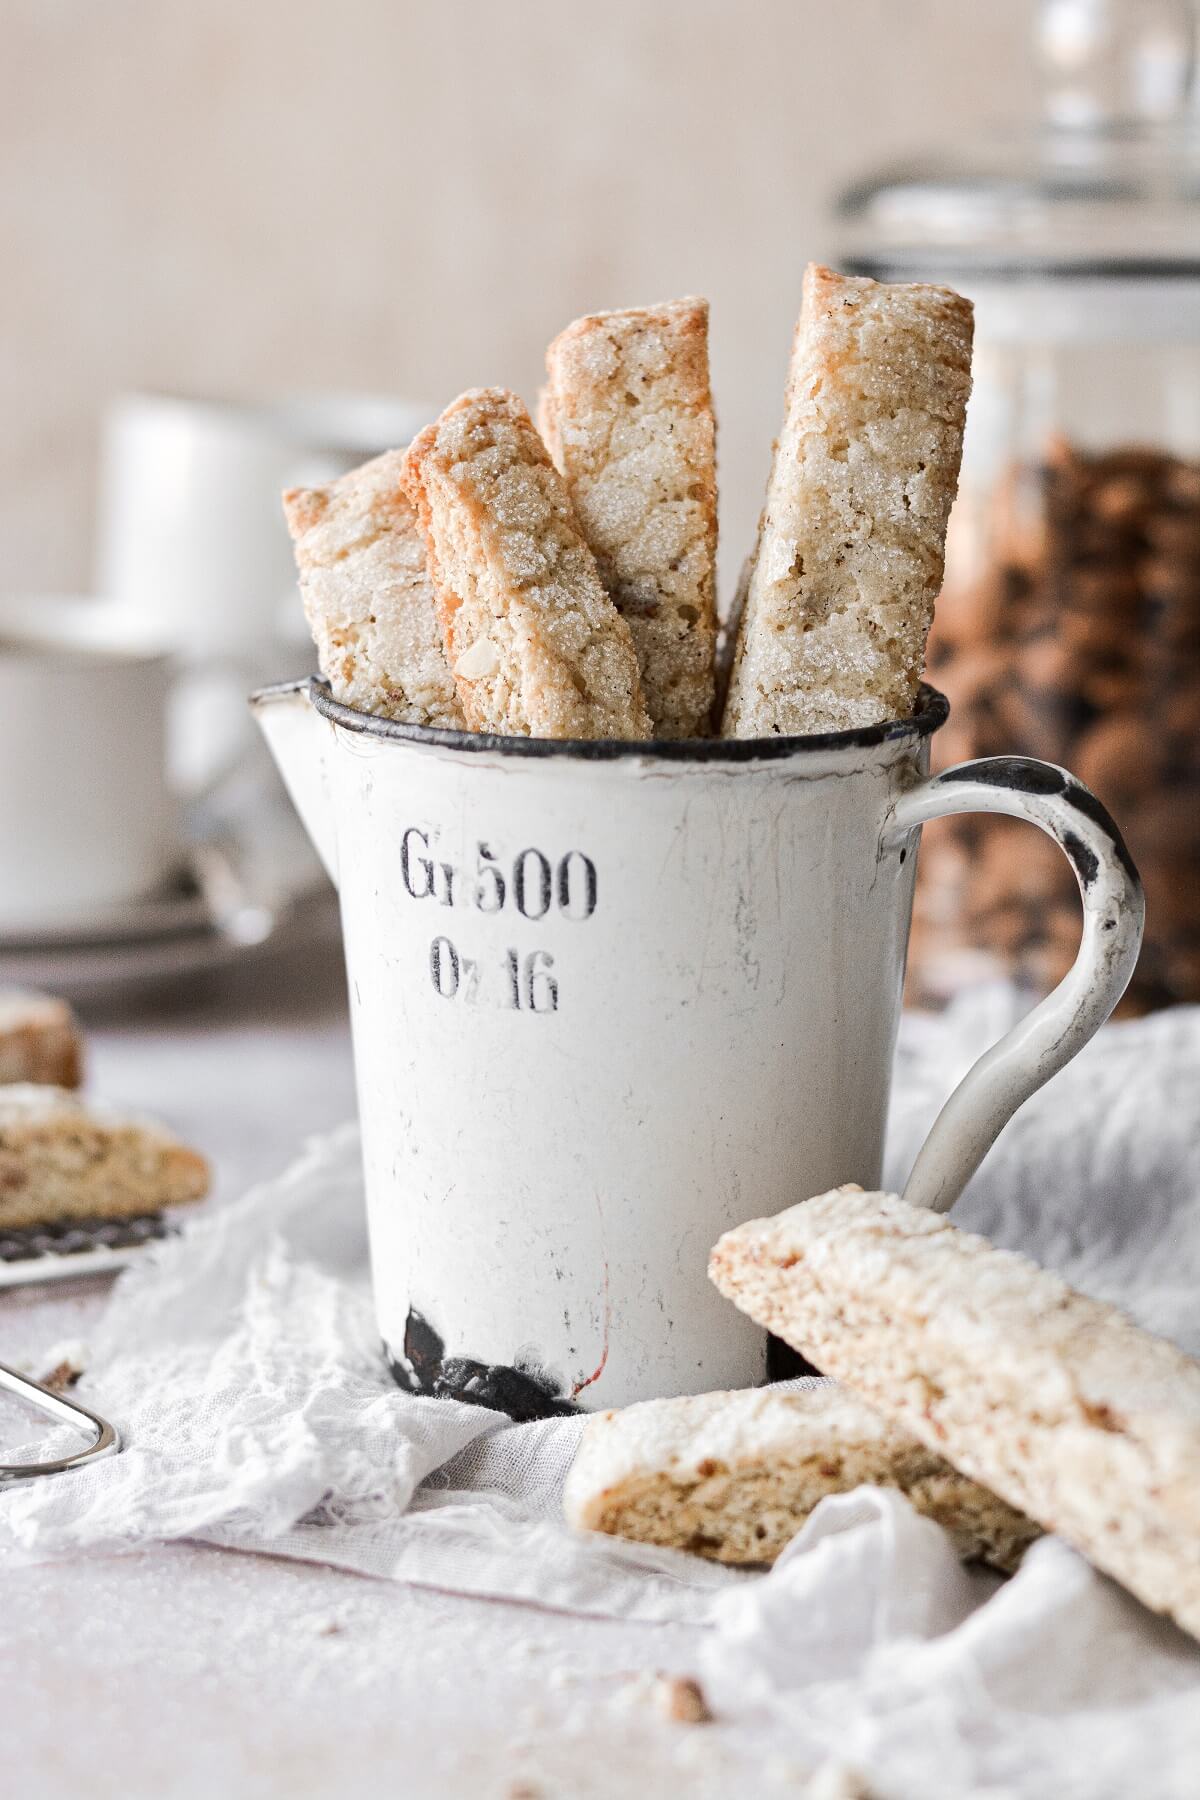 Almond biscotti standing up in a vintage measuring cup.